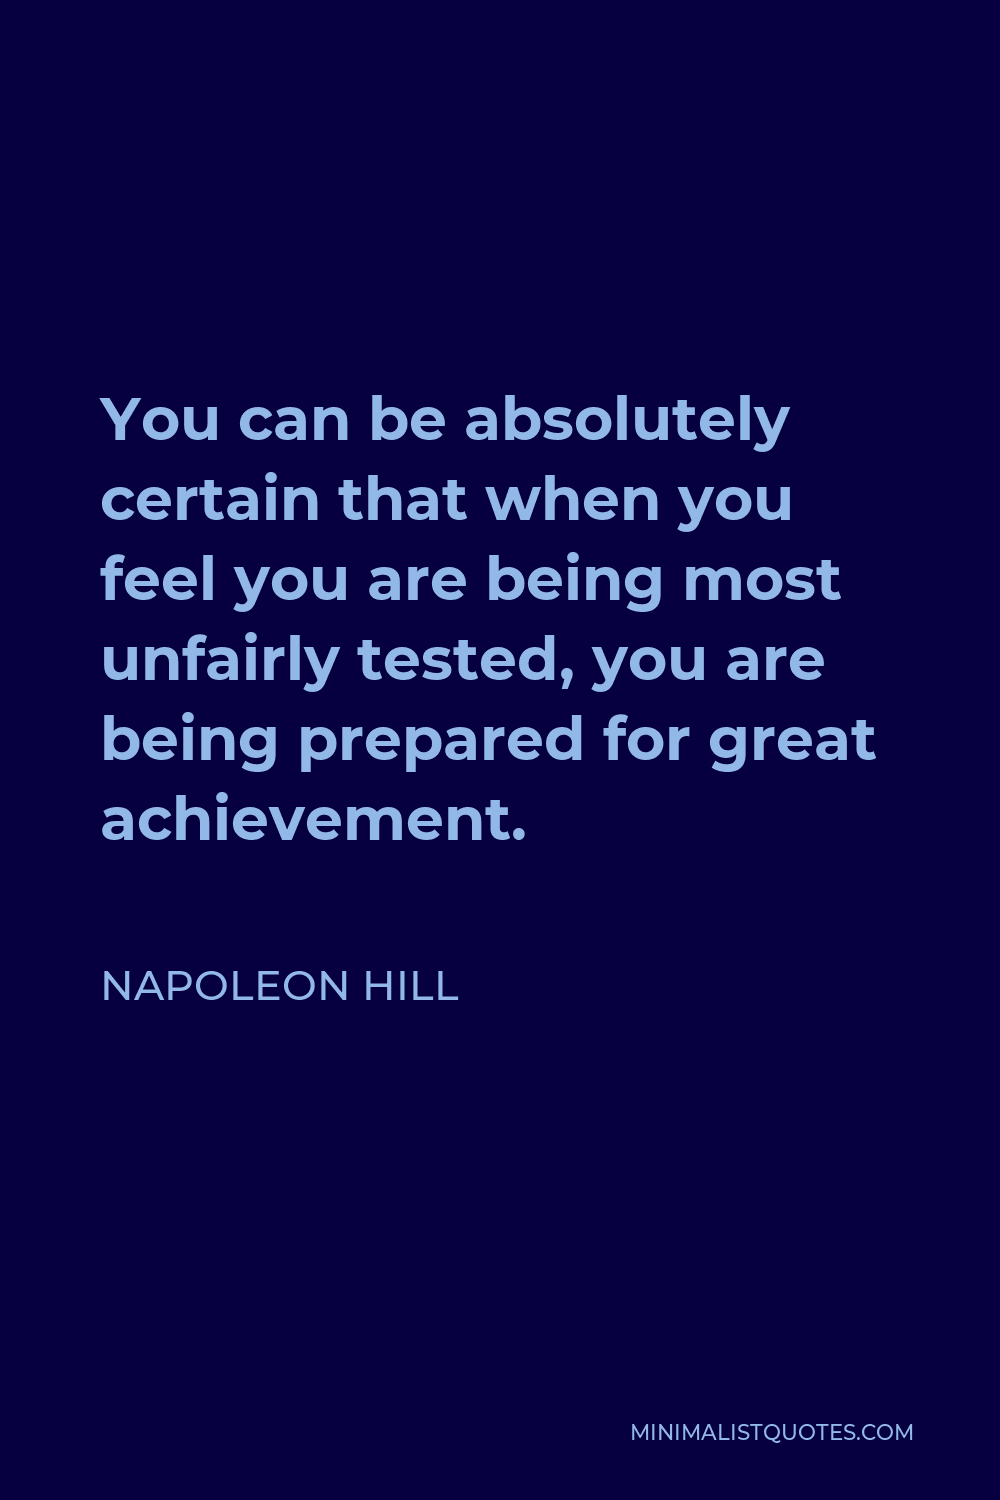 Napoleon Hill Quote - You can be absolutely certain that when you feel you are being most unfairly tested, you are being prepared for great achievement.